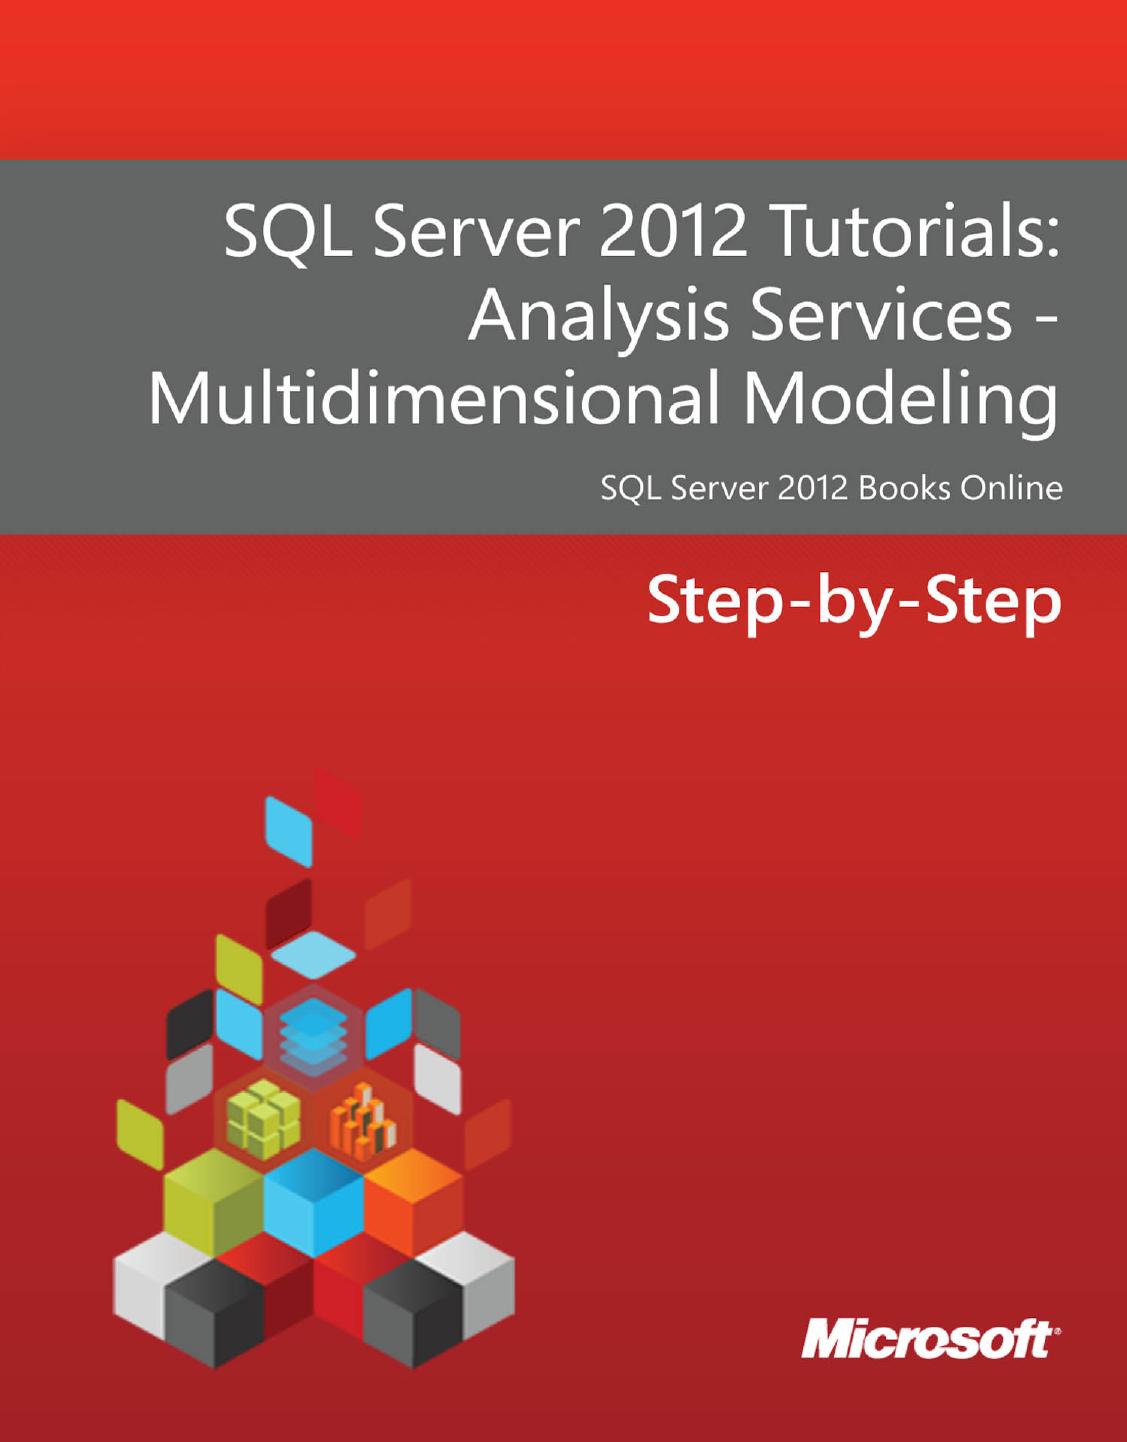 Analysis Services Multidimensional Modeling - Step-by-Step